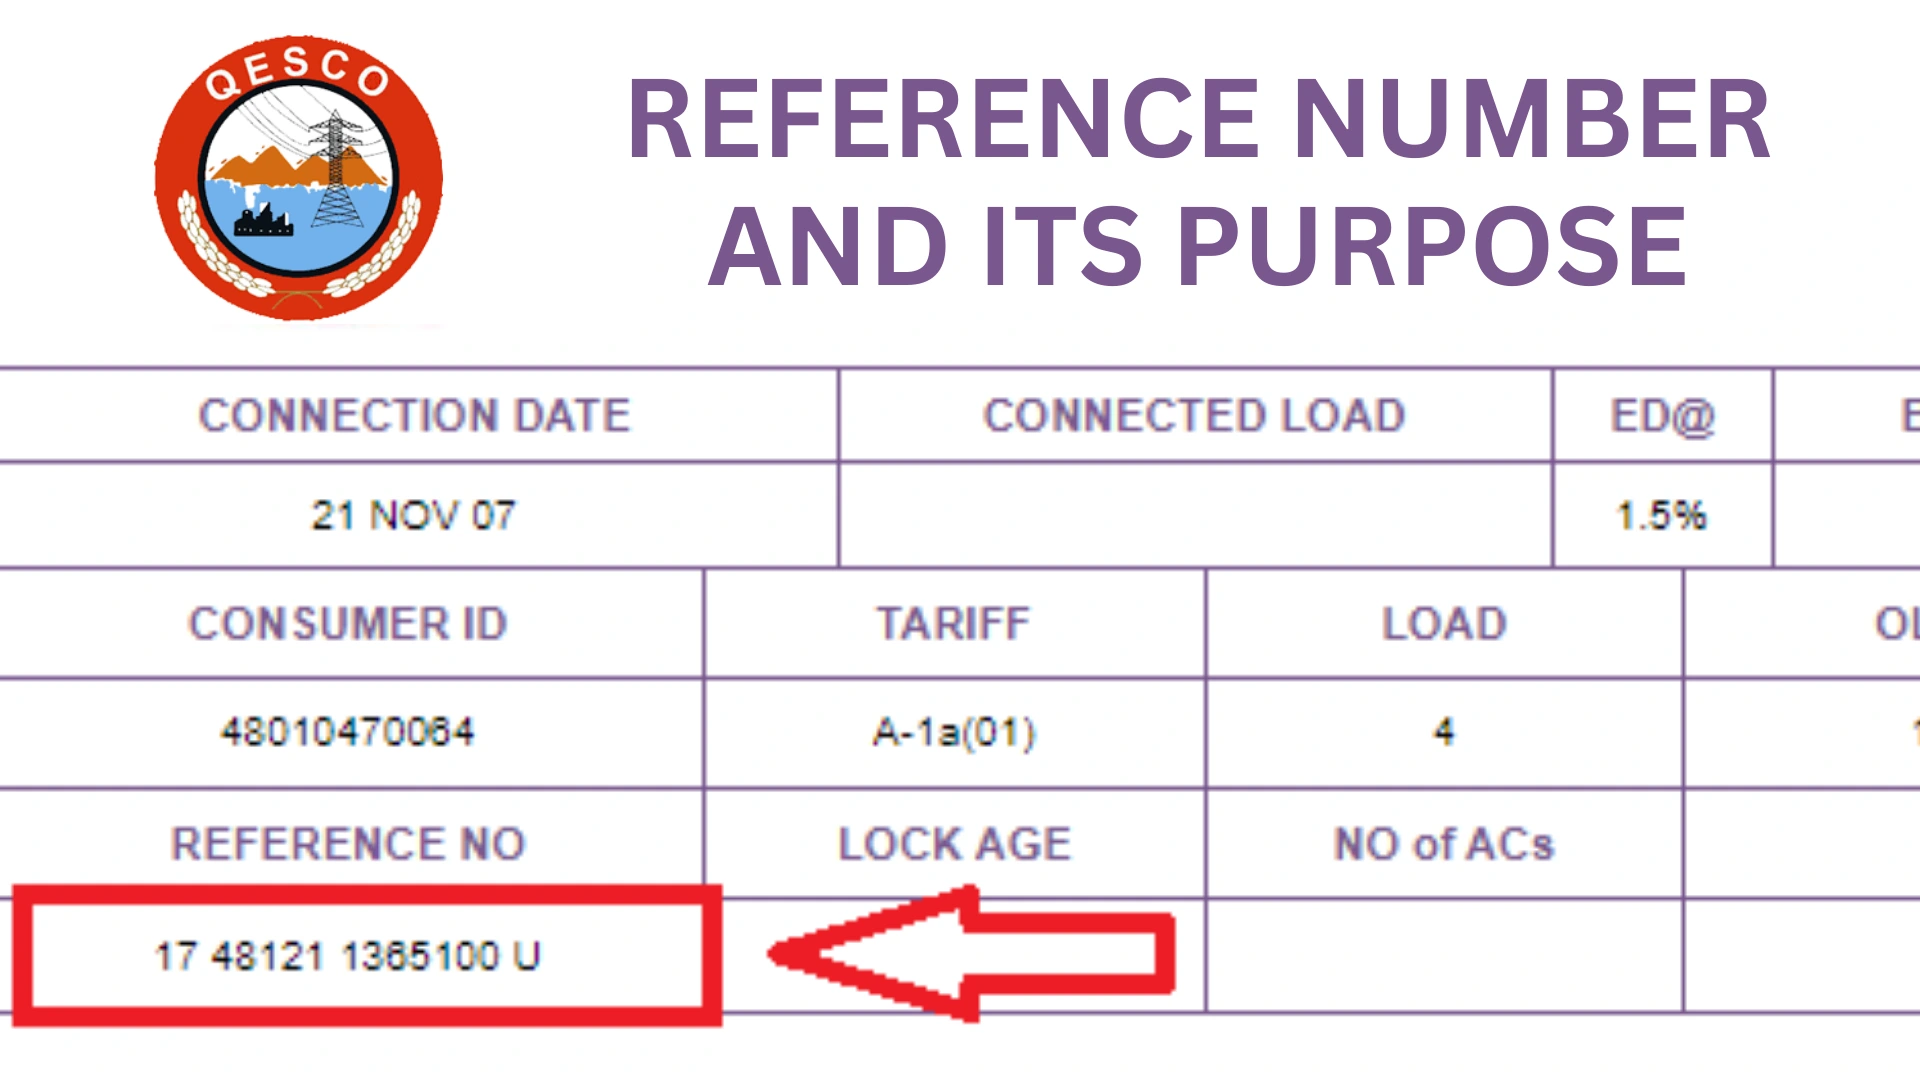 Reference Number and its Purpose